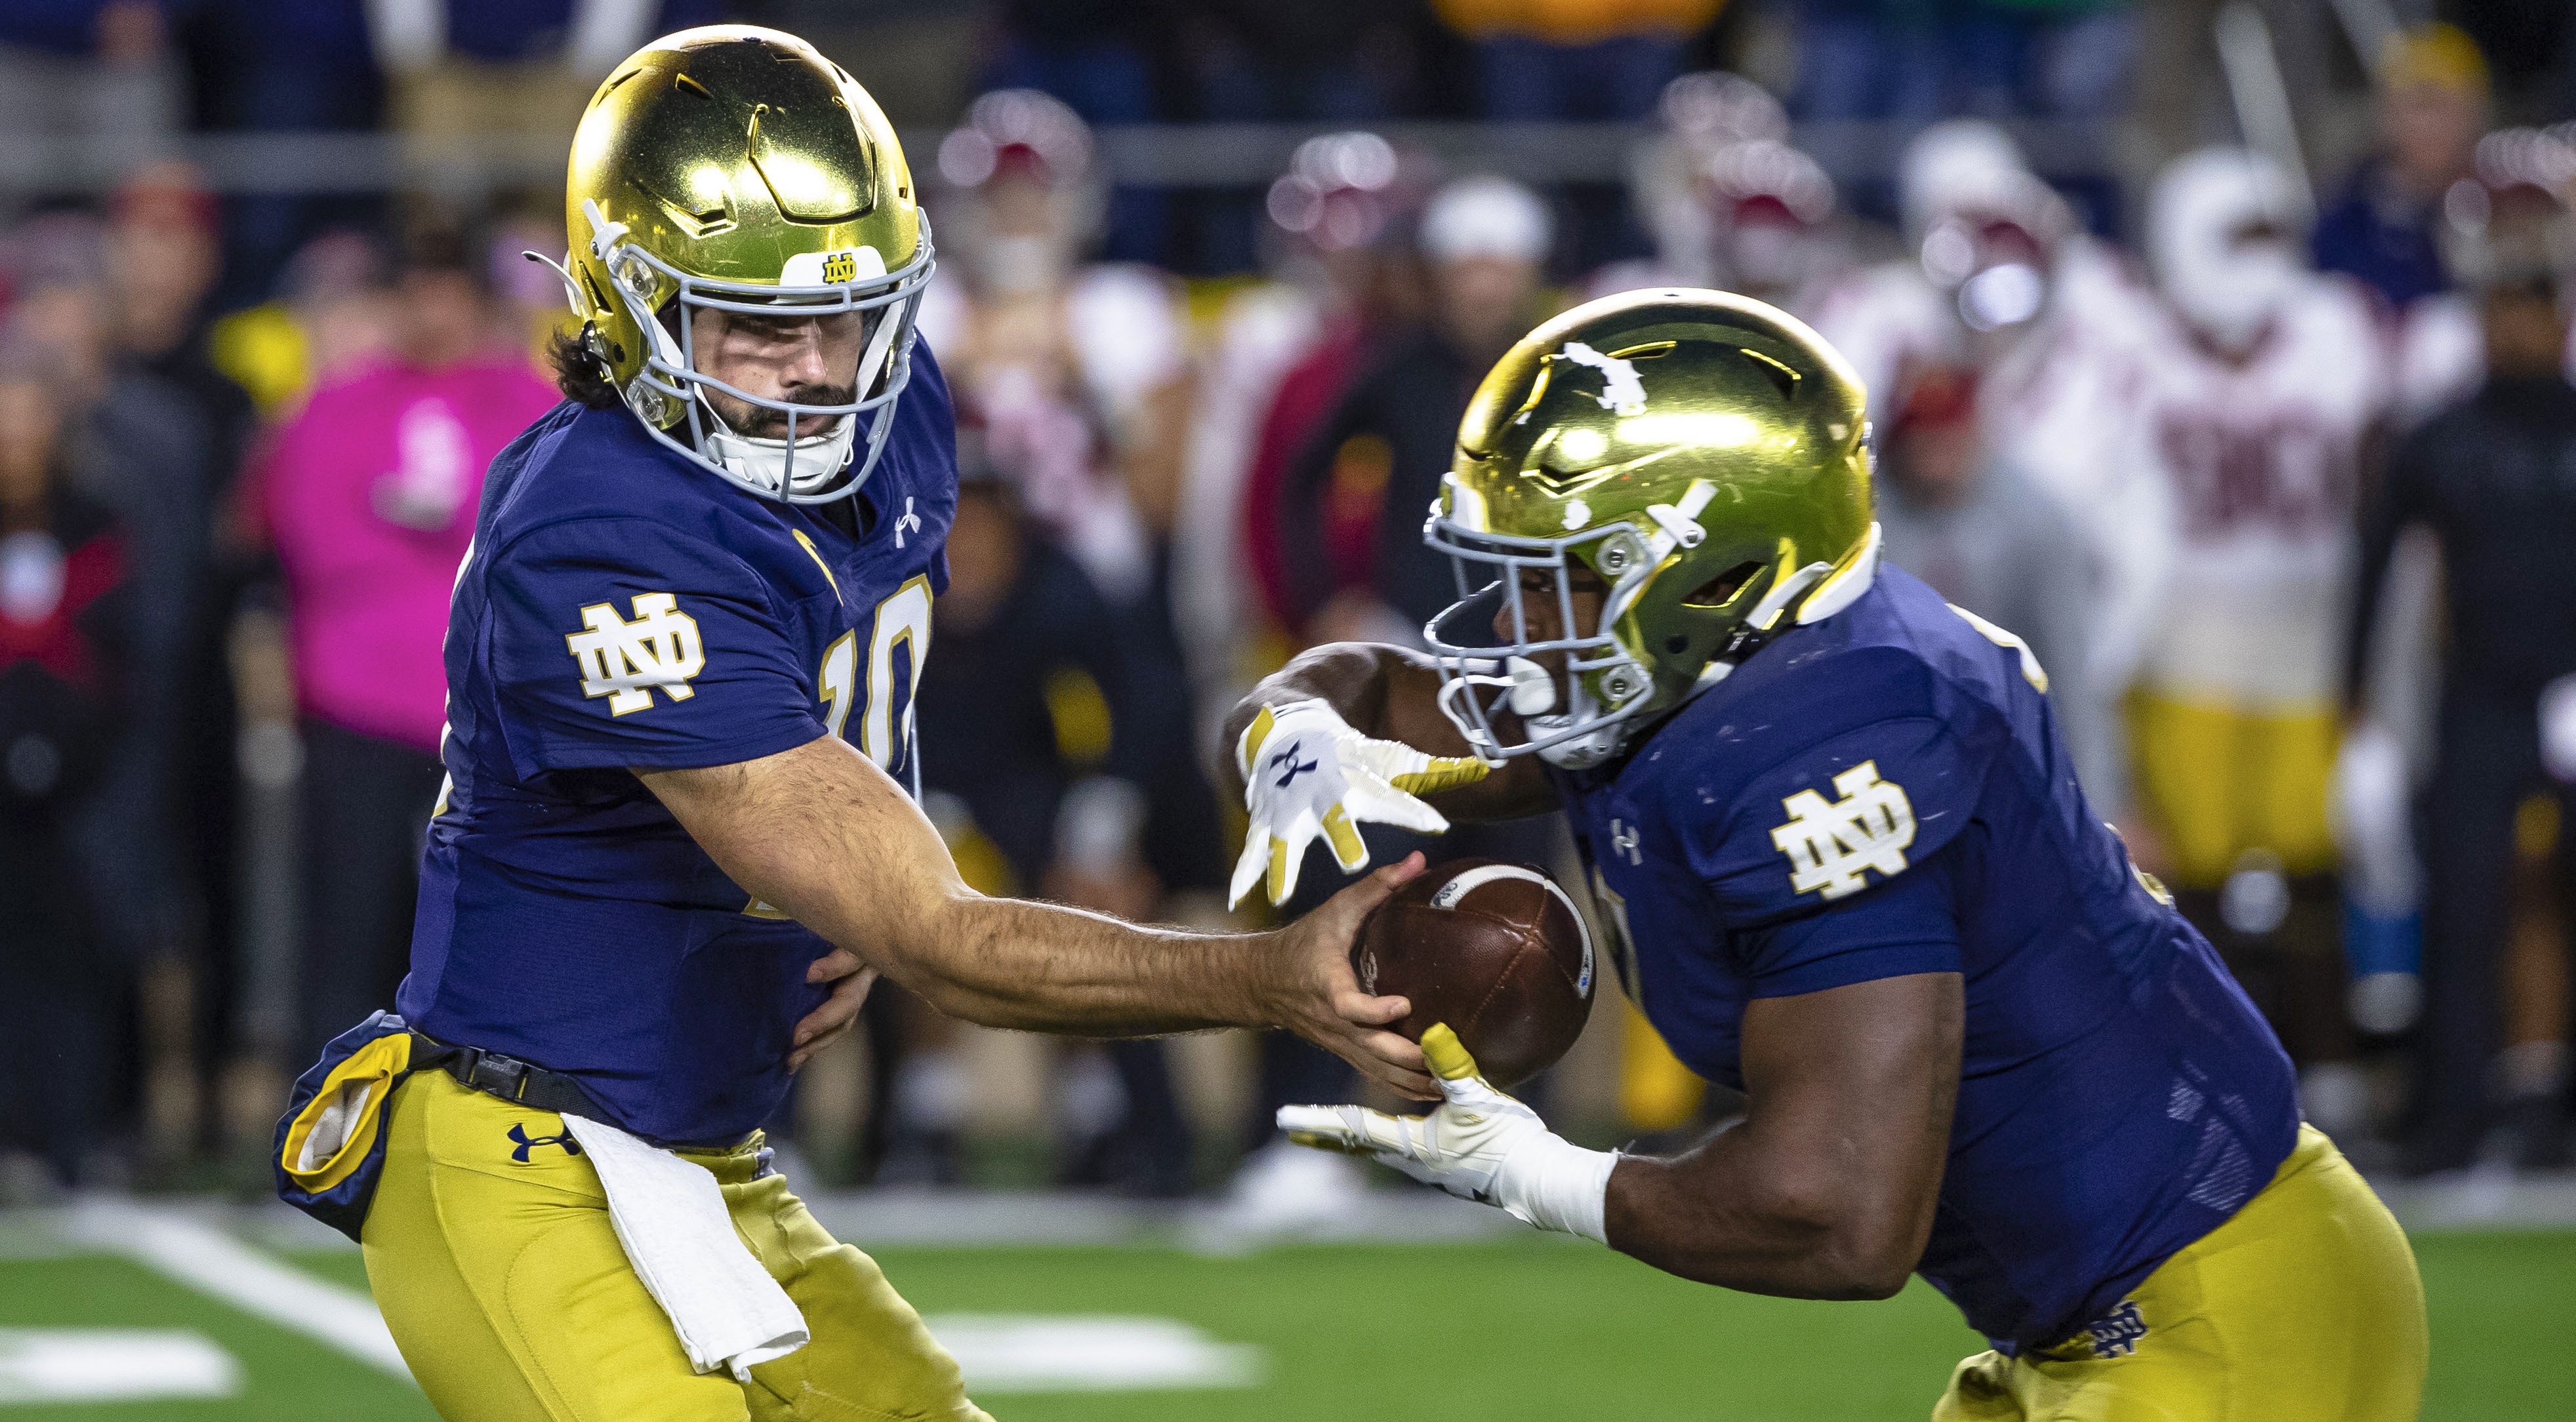 No Change For Notre Dame In Latest AP, Coaches Polls - InsideNDSports